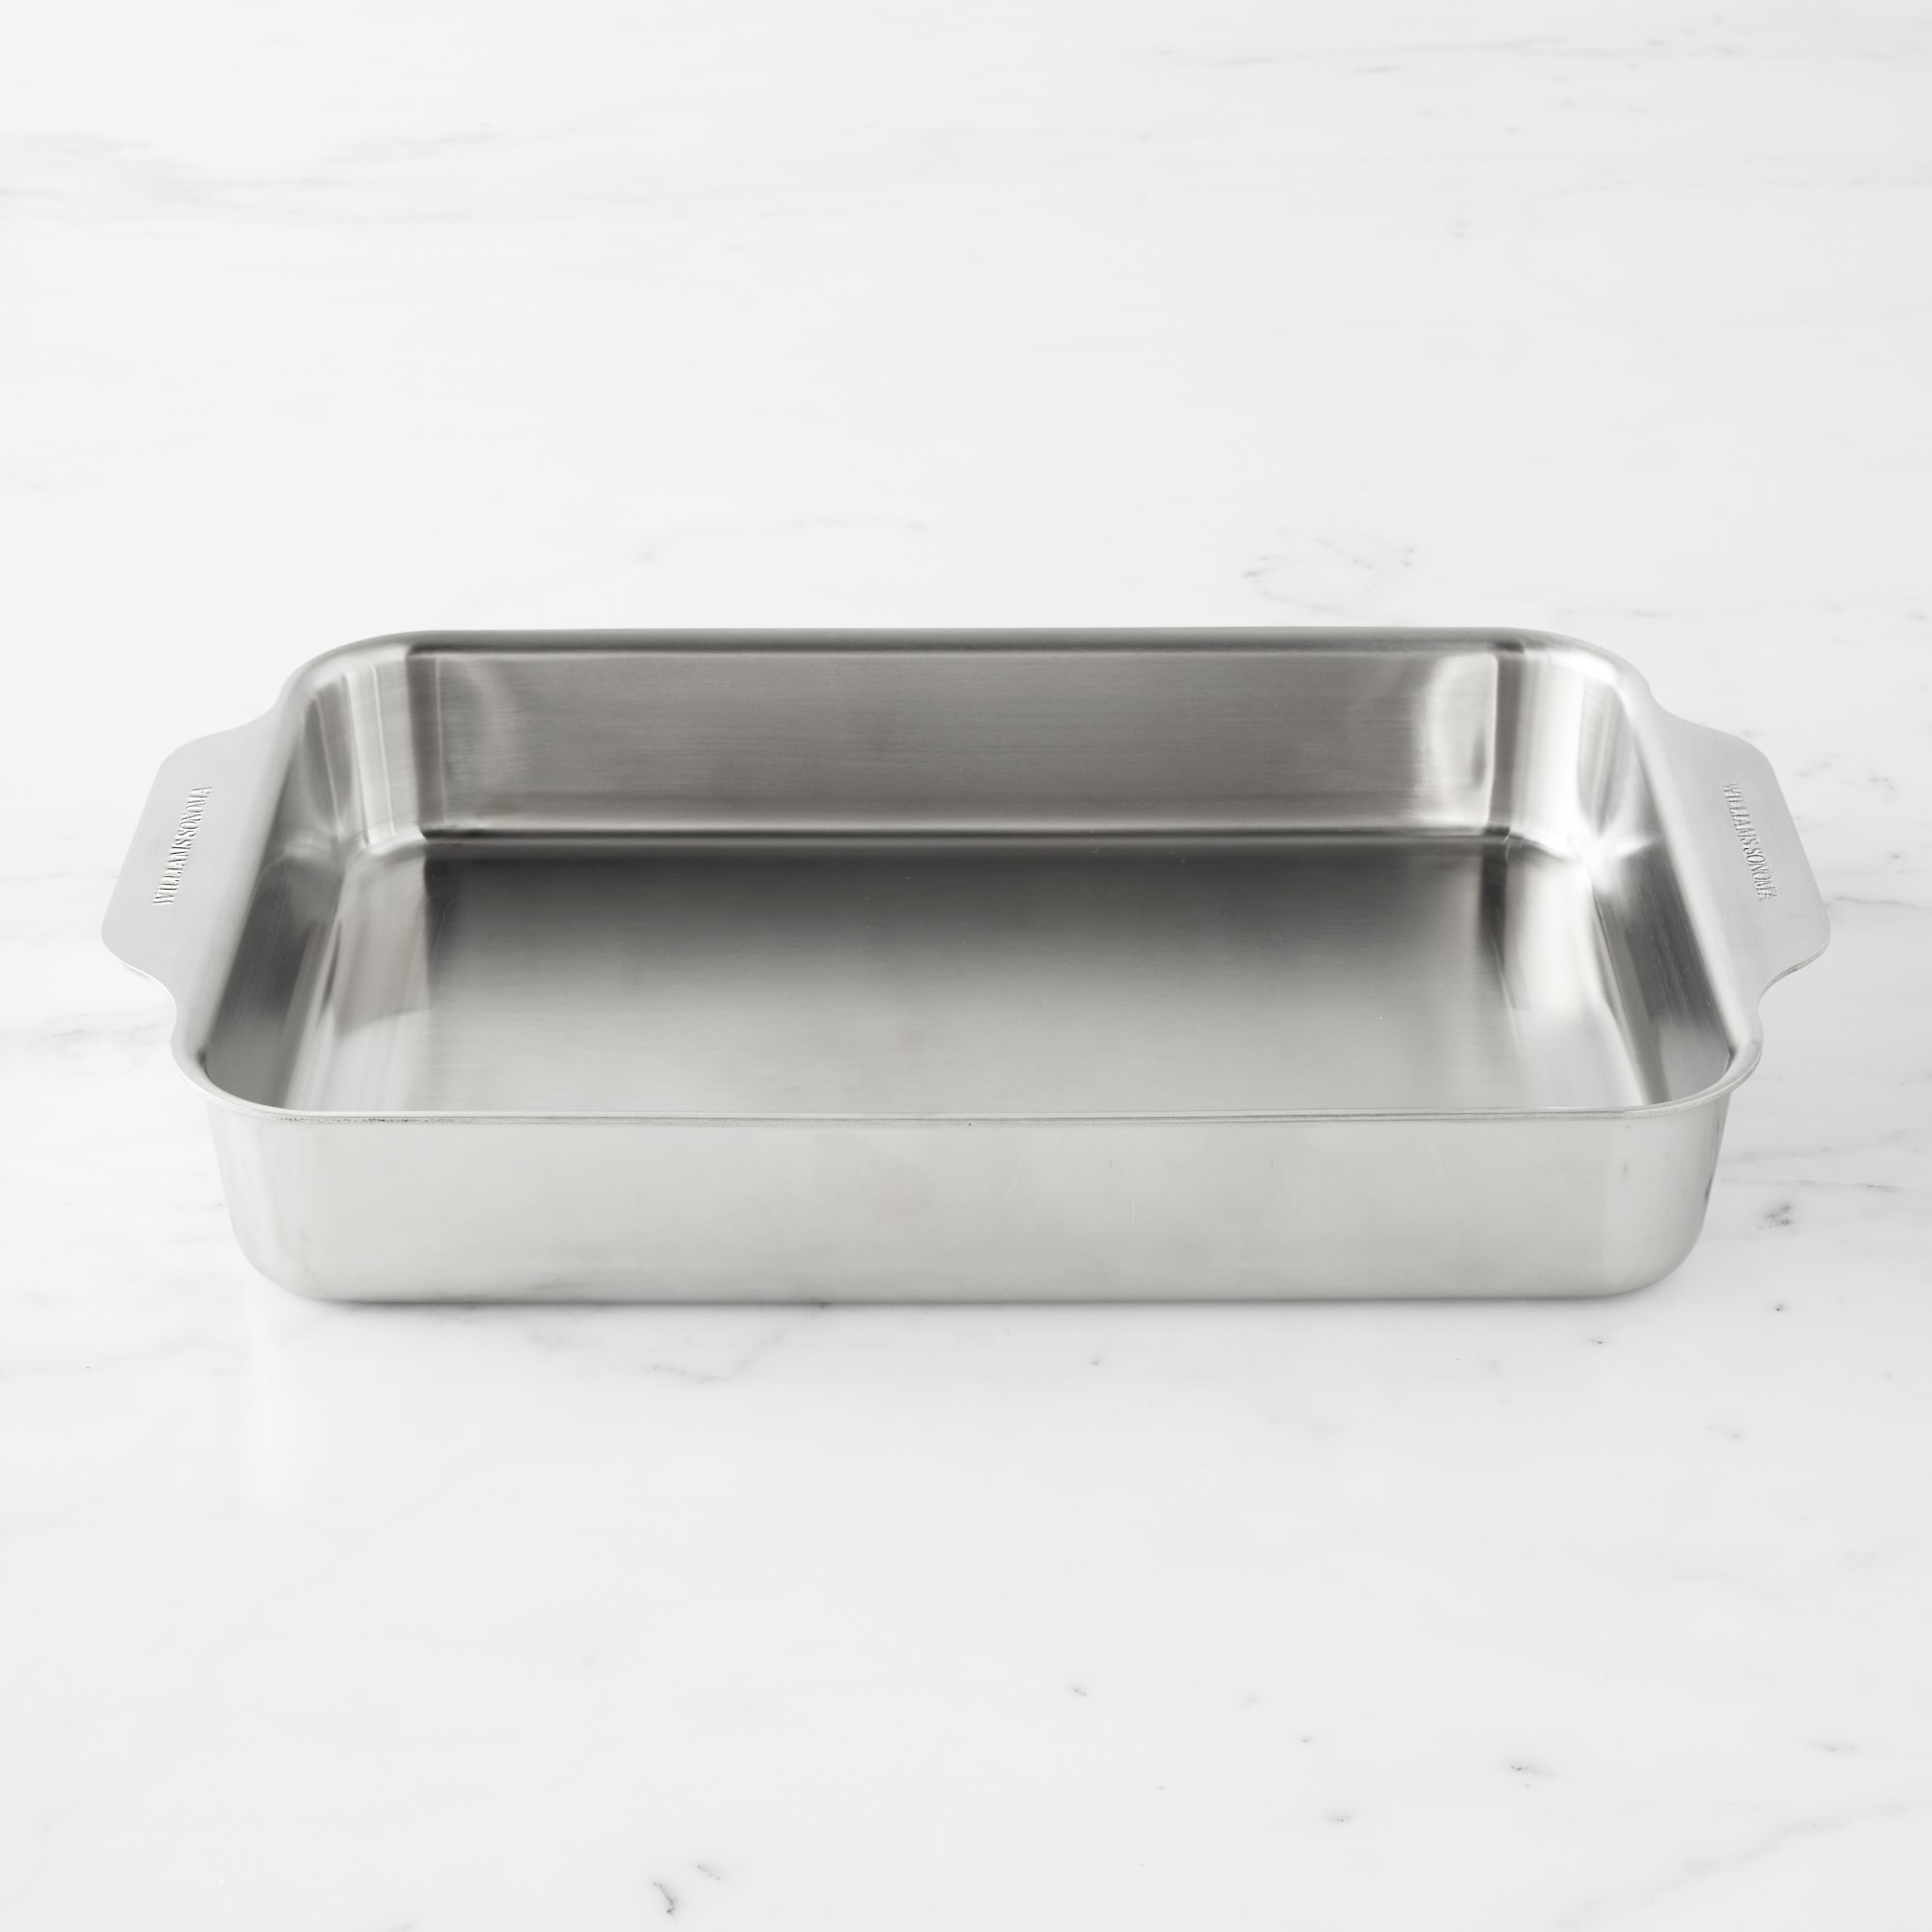 Williams Sonoma Thermo-Clad Stainless-Steel Ovenware Rectangular Pan, 9" x 13"